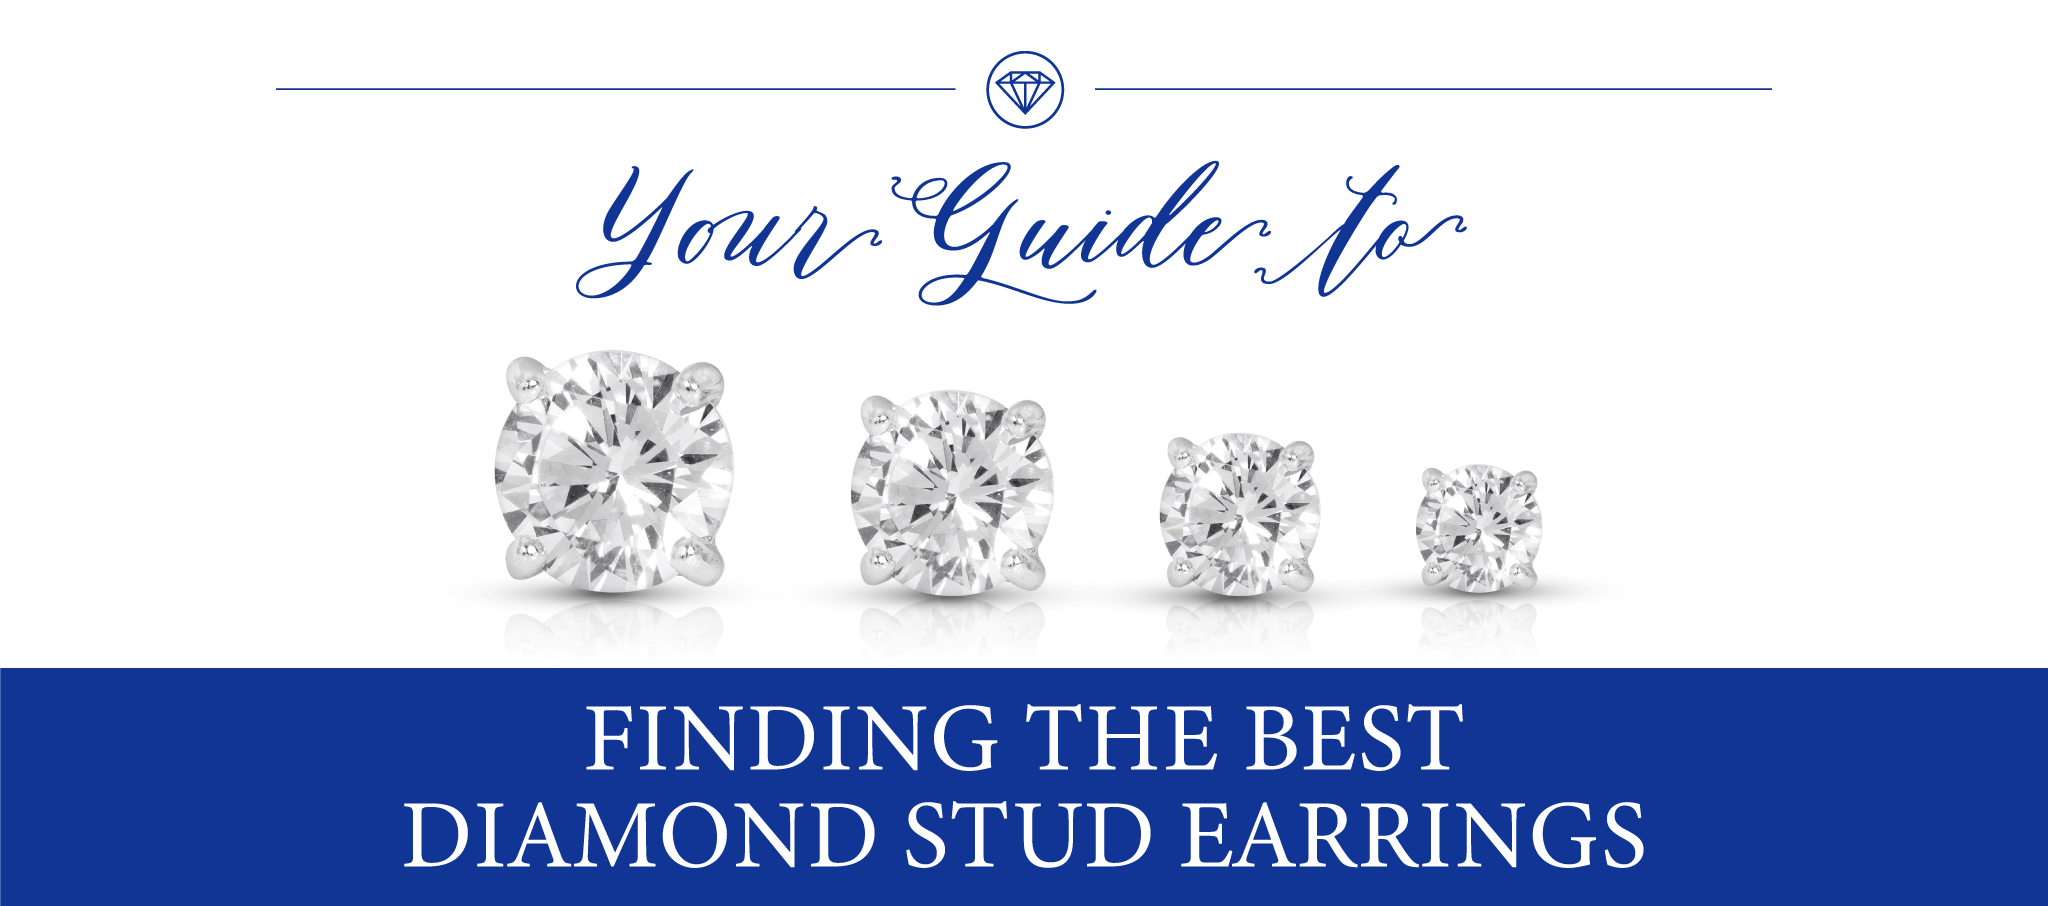 Your Guide To Finding The Best Diamond Stud Earrings